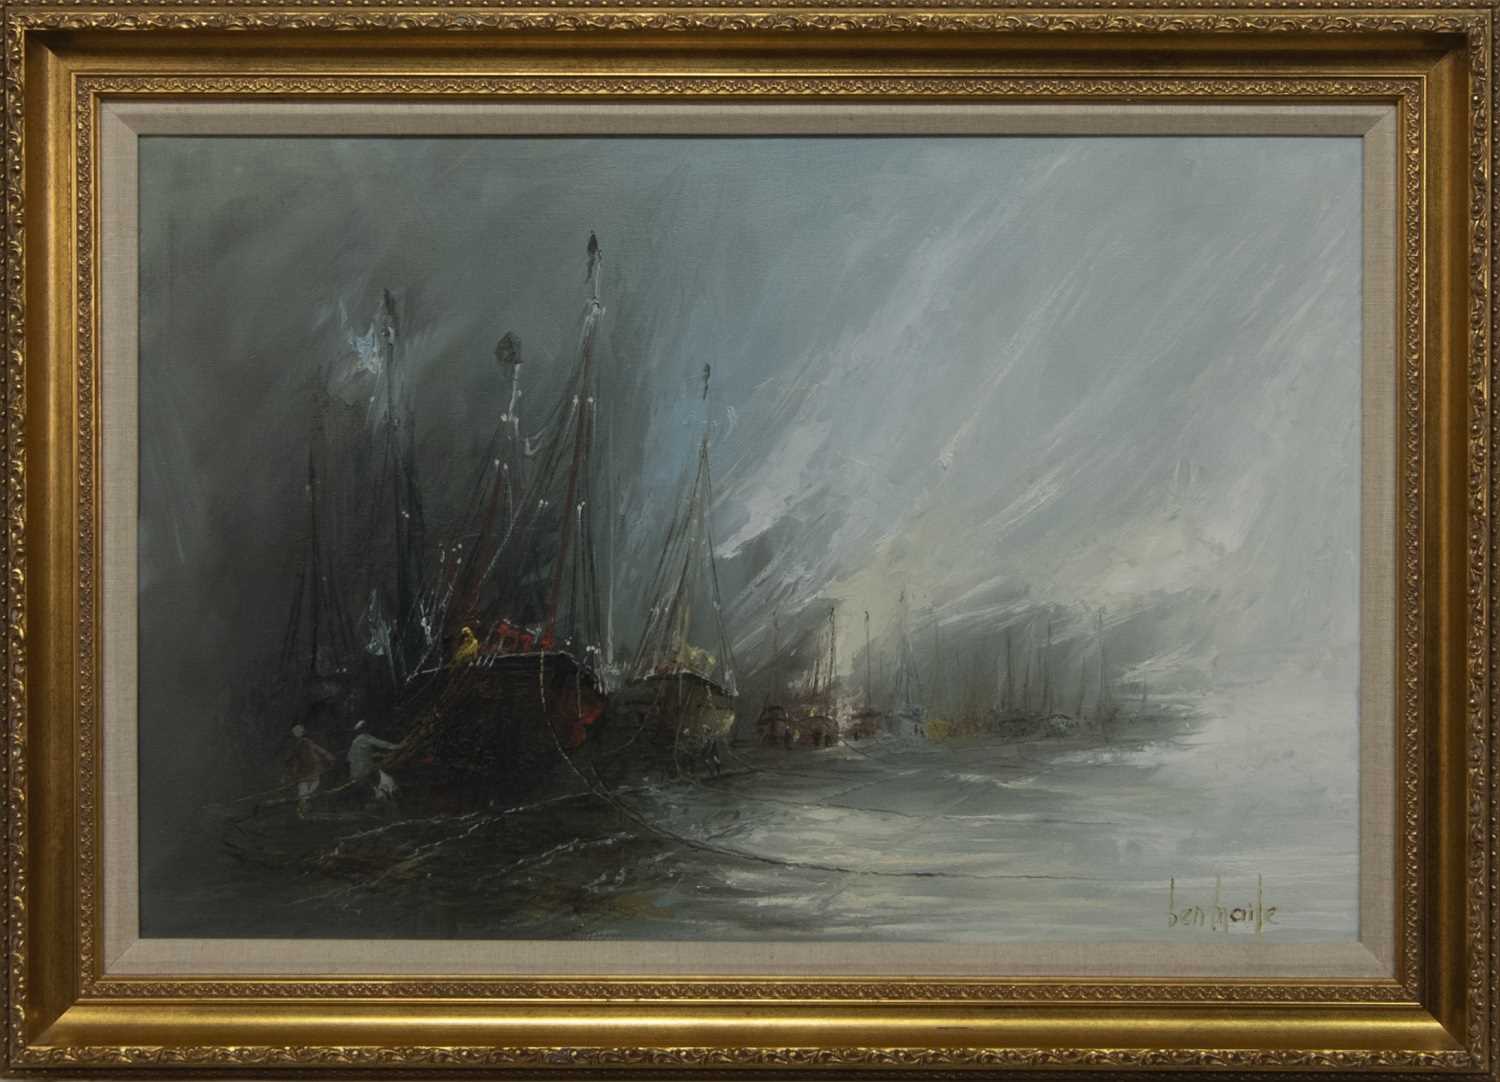 Lot 501 - THE ENCROACHING TIDE, AN OIL BY BEN MAILE